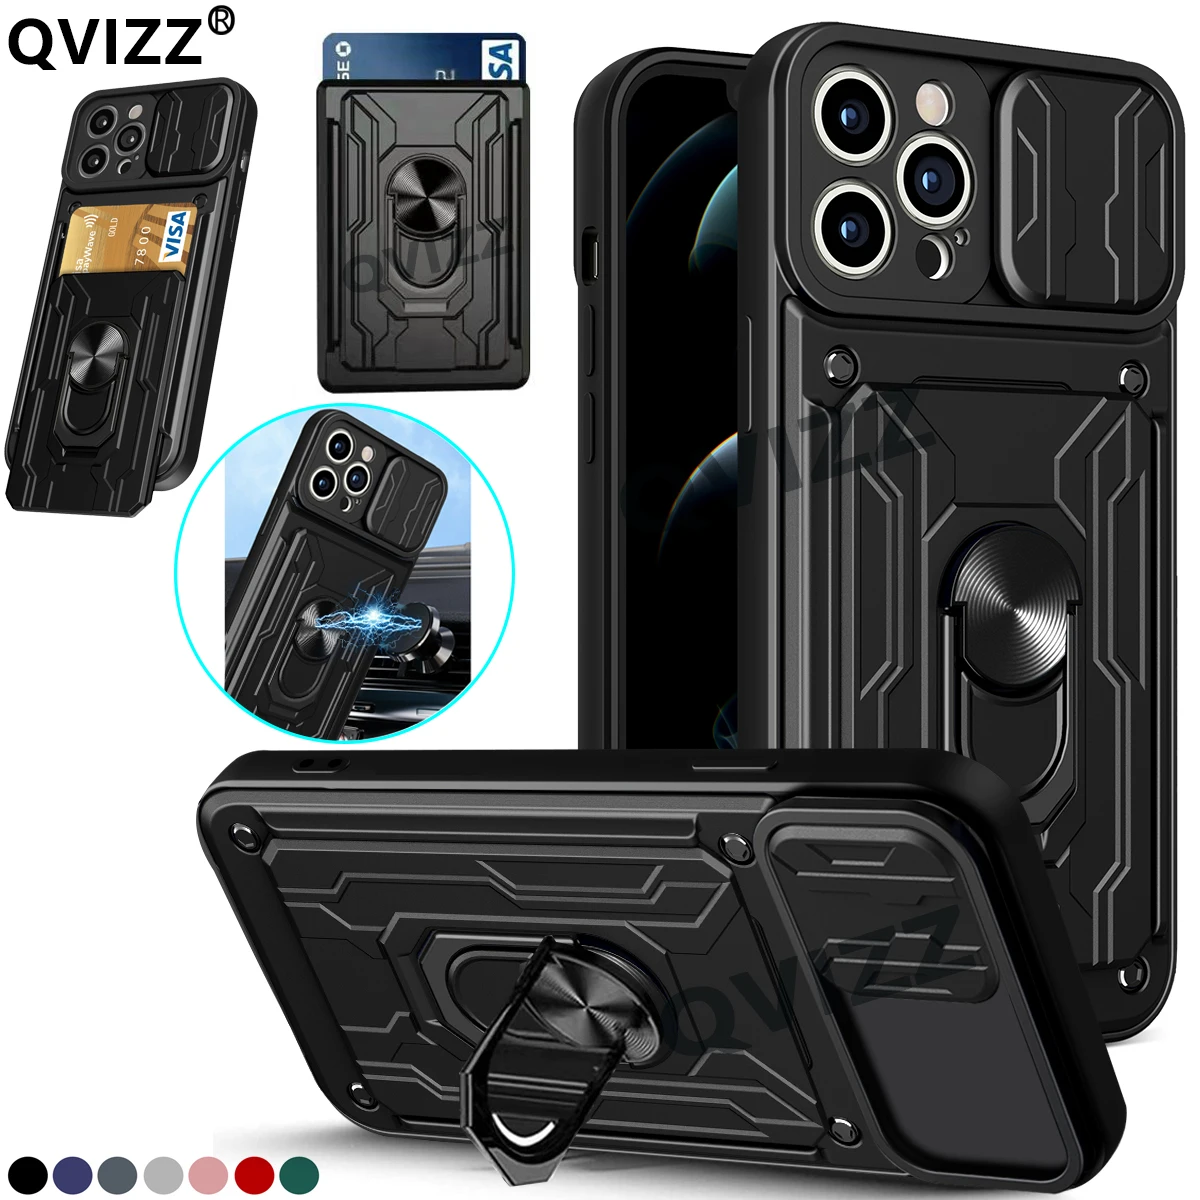 Card Pocket Case For iPhone 13 Pro Max 11 12 Pro Max XR XS Max 8 7 6S Plus SE 2 All-inclusive Slide Camera Wallet Bracket Ring